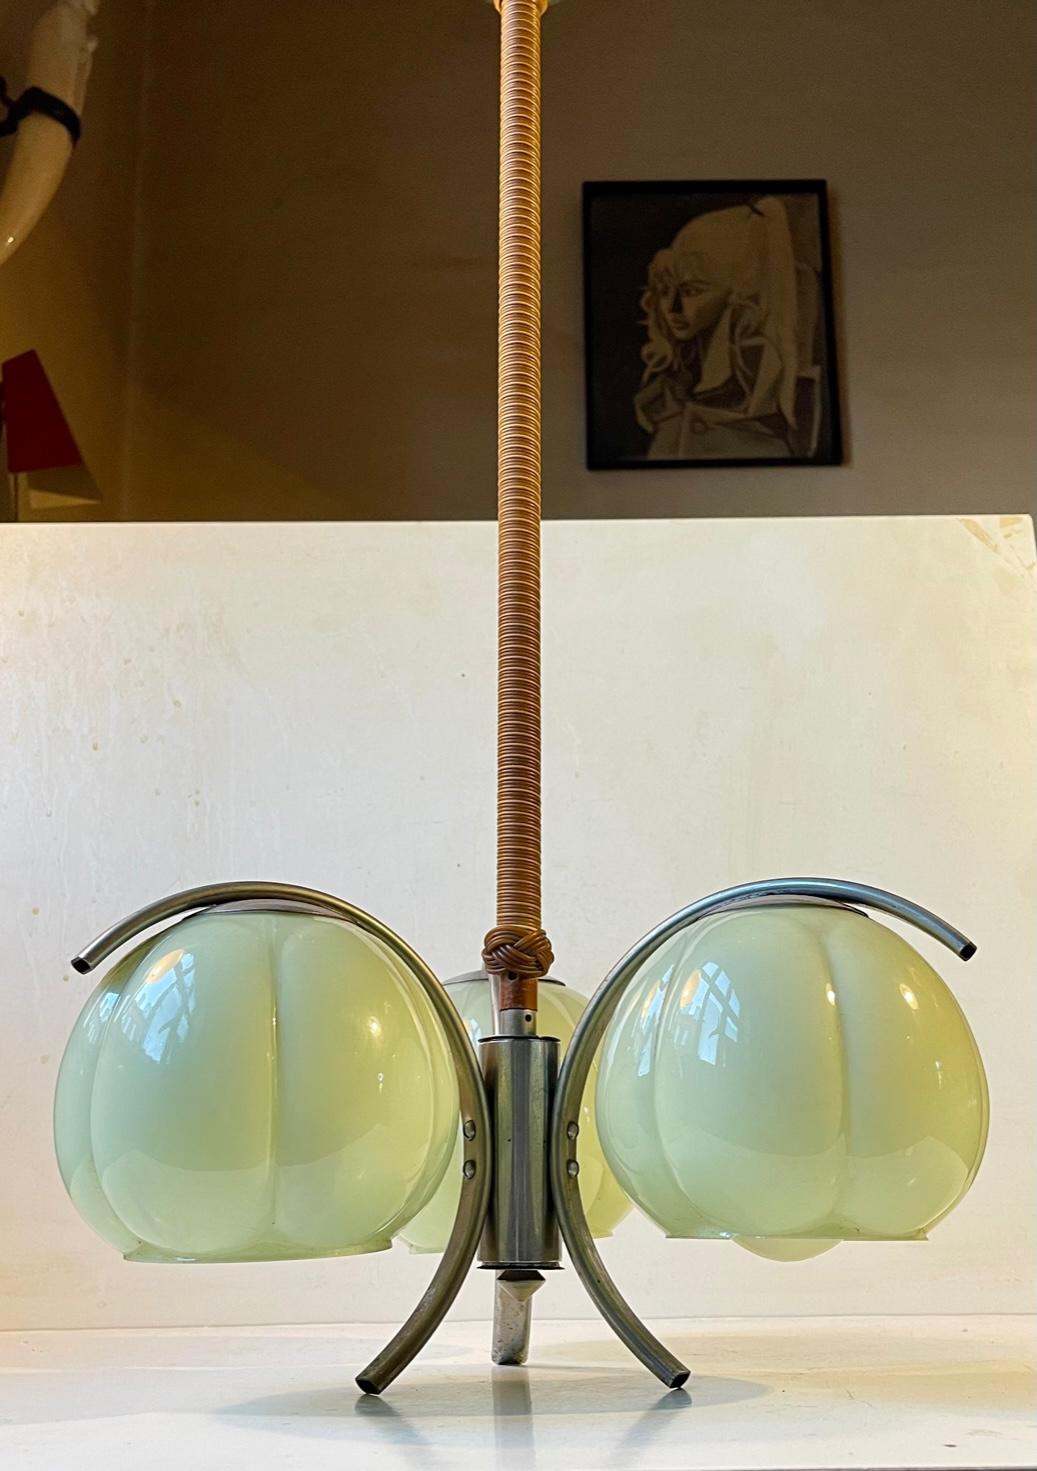 A stylish 3-shaded chandelier featuring 3 light green gourd shades, a nickel plated frame, hand-weaved/rolled rod with two-colored resin rattan and its original nickel canopy. It was made in Germany between 1930-40. Distinct functionalist styling